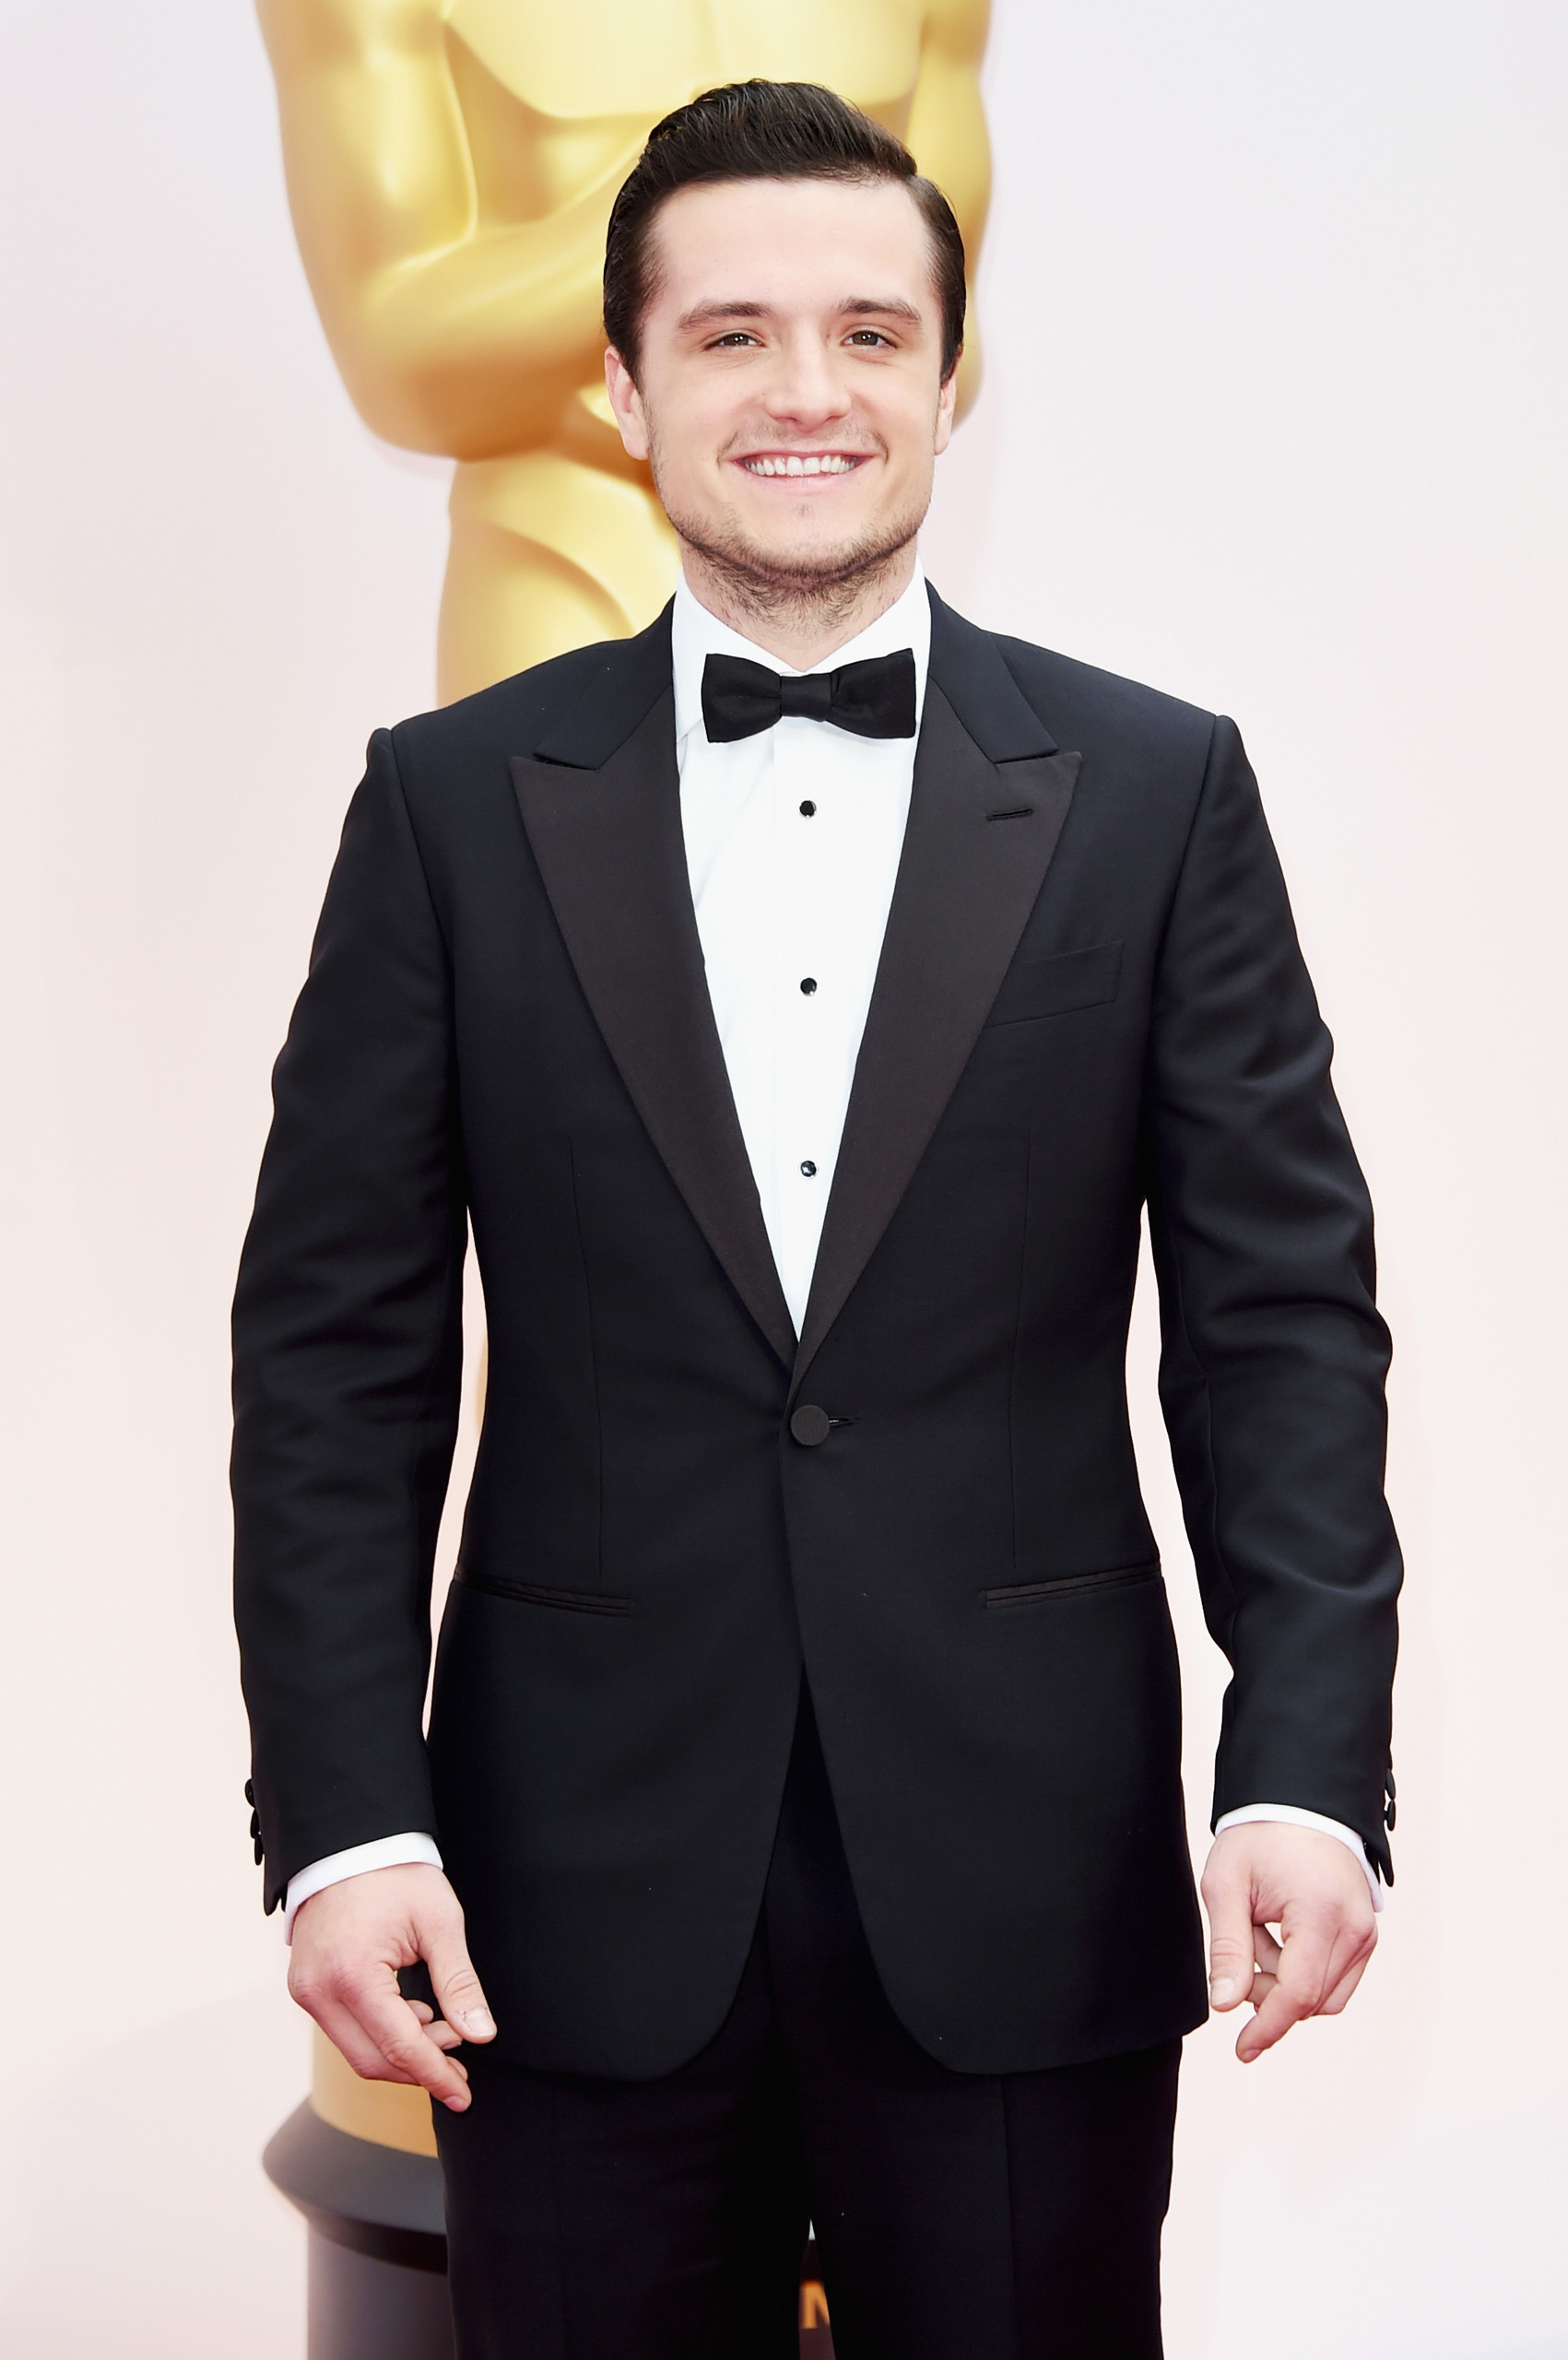 Josh Hutcherson attends the 87th Annual Academy Awards on Feb. 22, 2015 in Hollywood, Calif.